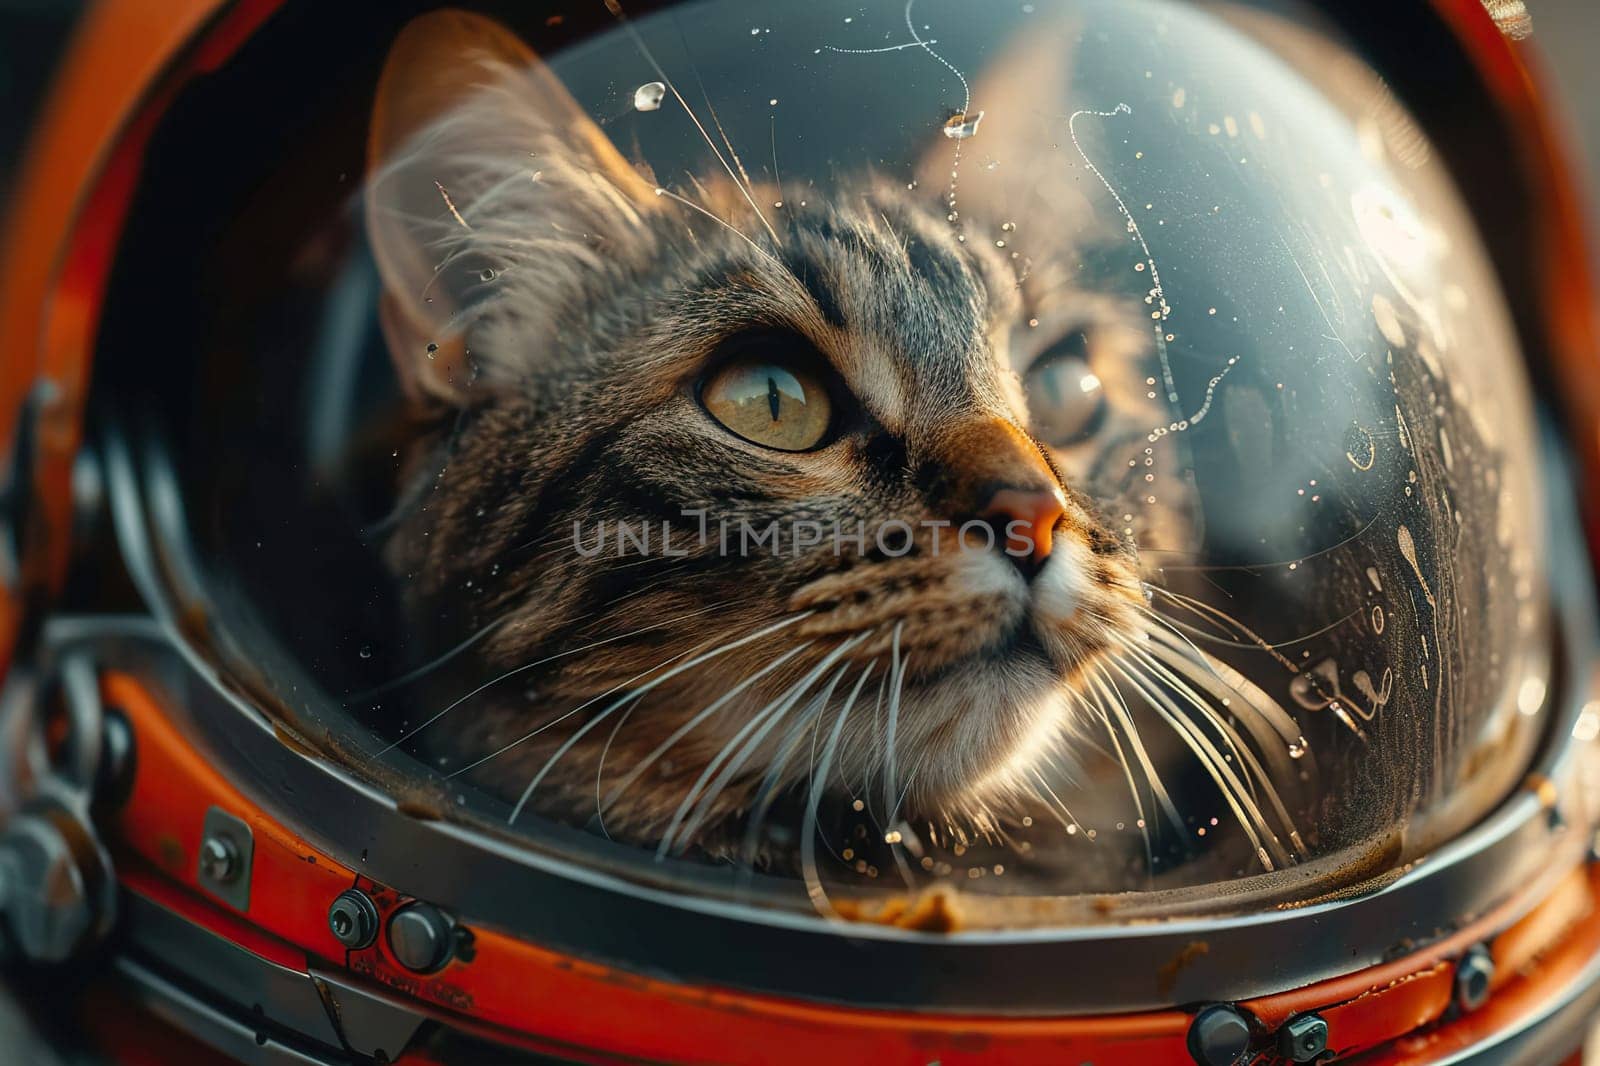 Close-up of the muzzle of a gray cat in a spacesuit helmet.